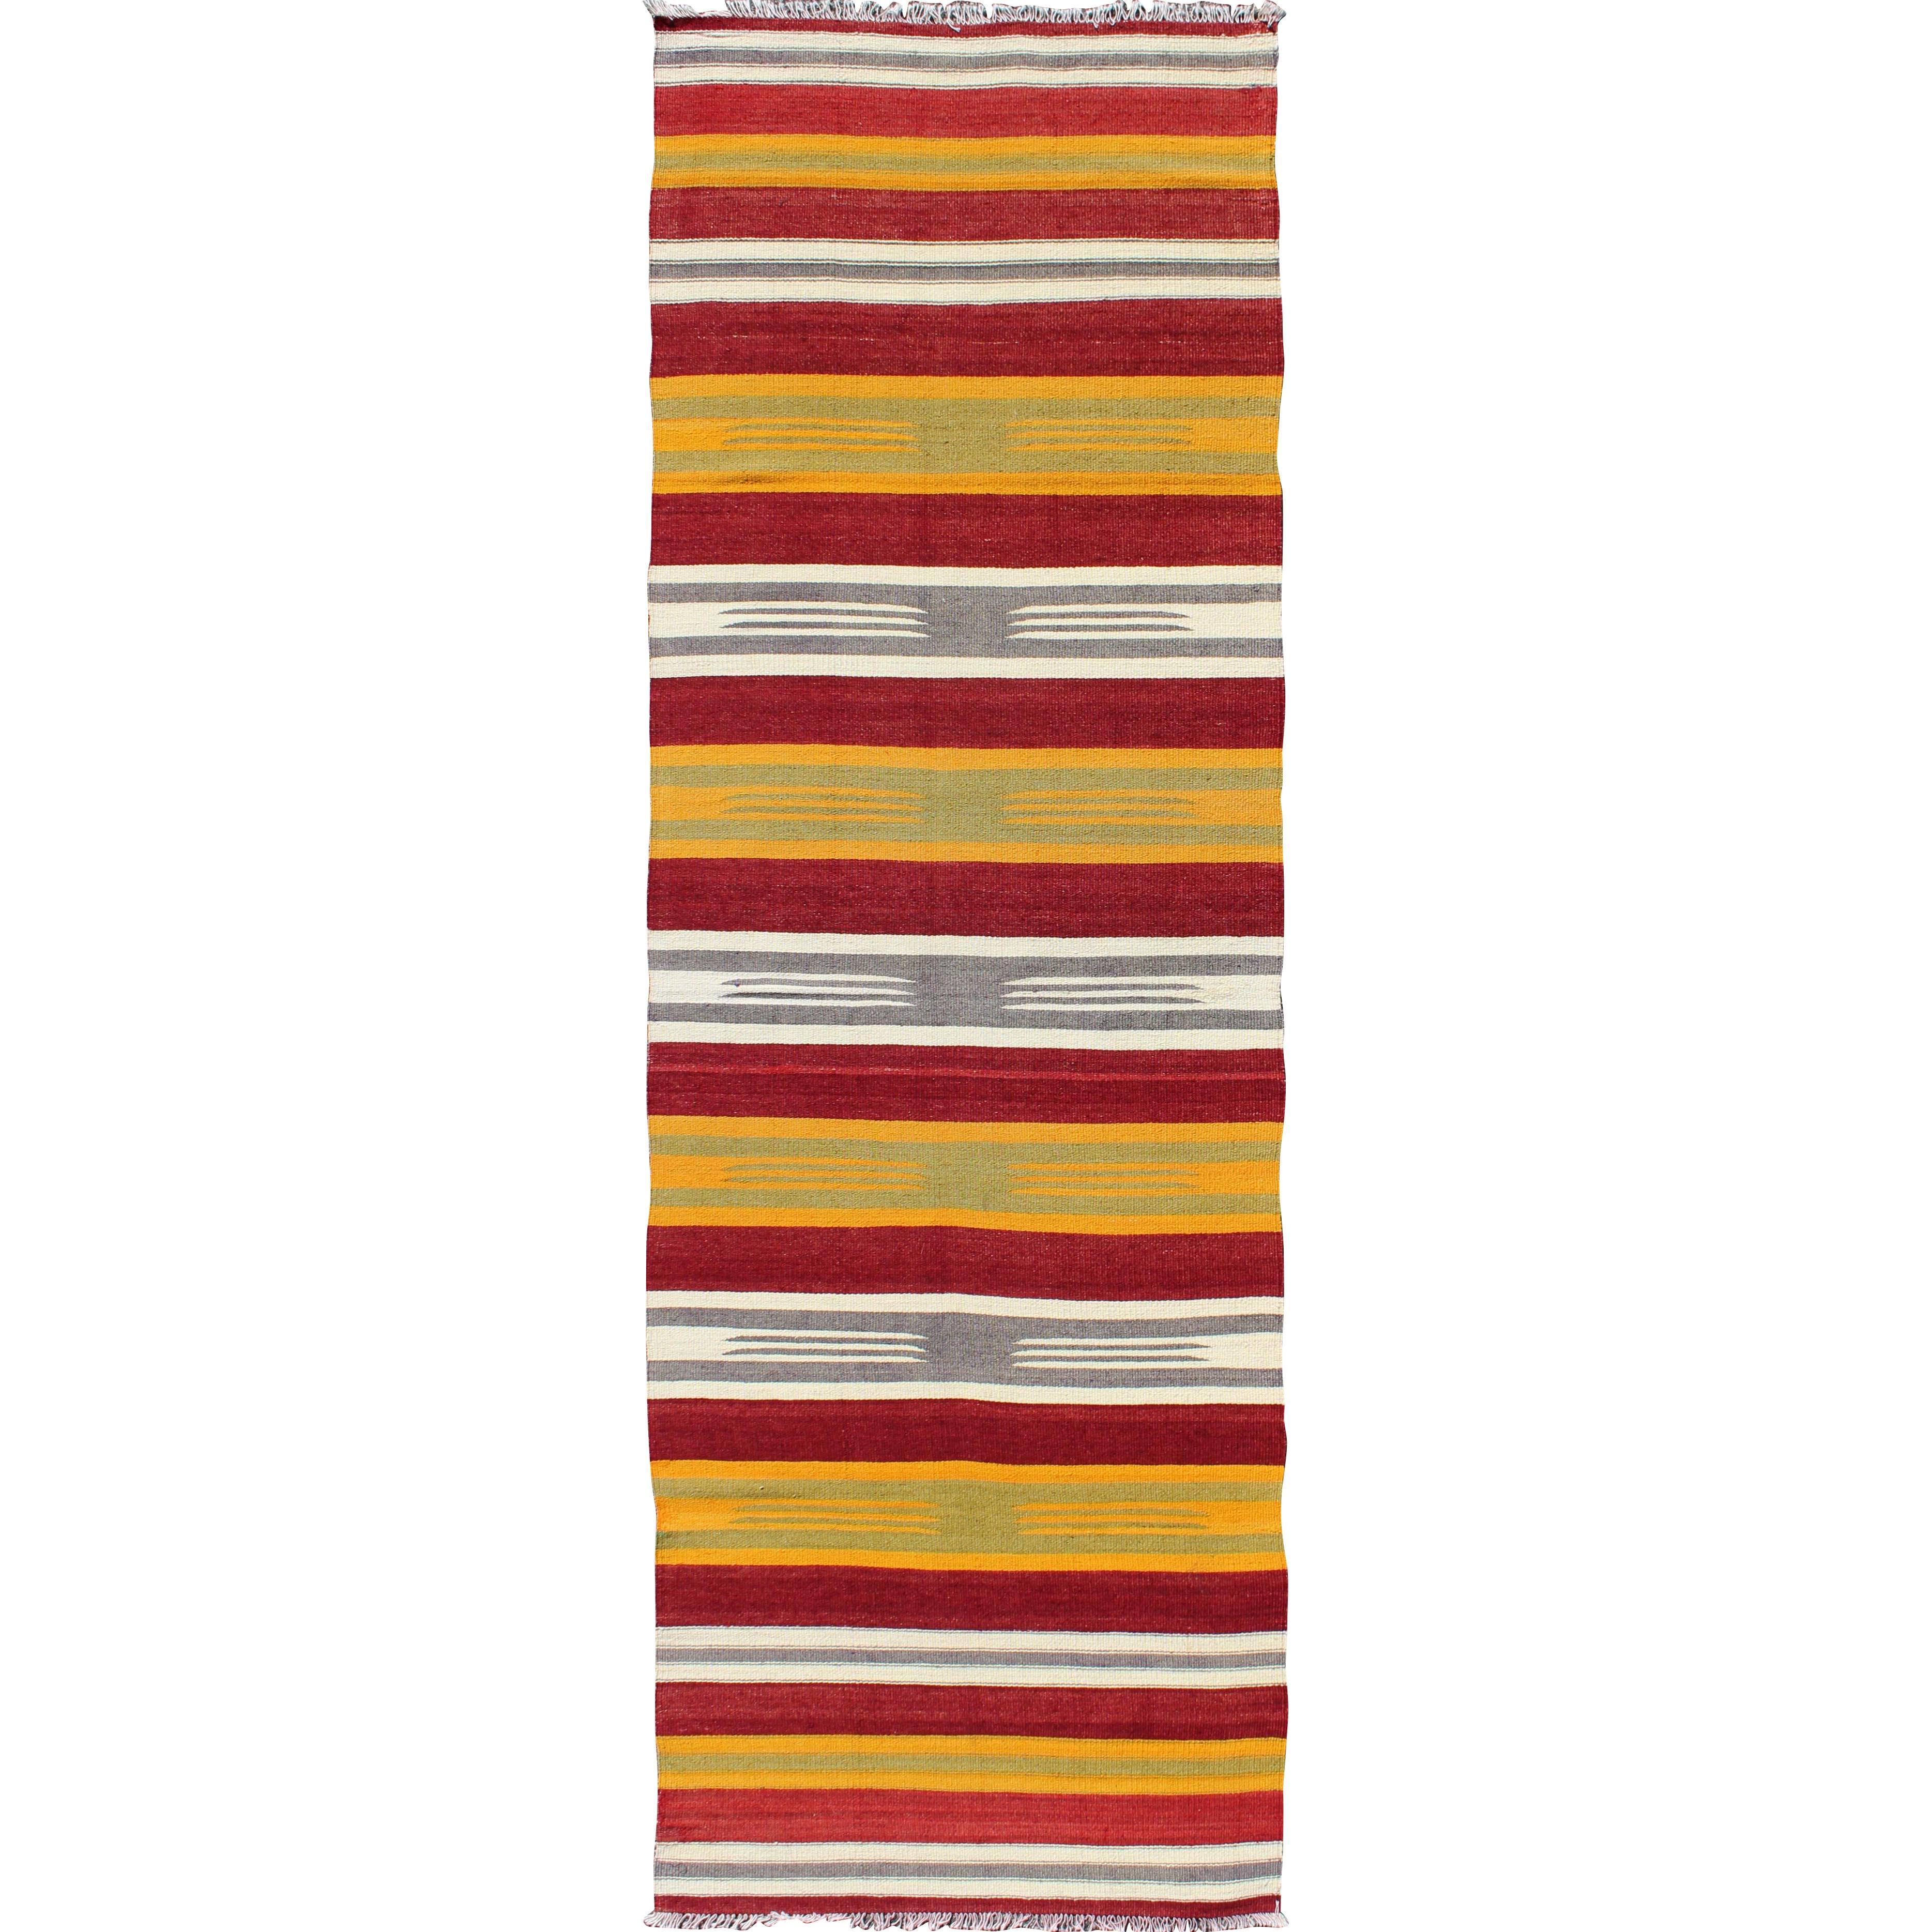 Vintage Turkish Kilim Runner with Stripes in Red, Green, Yellow, Ivory and Gray